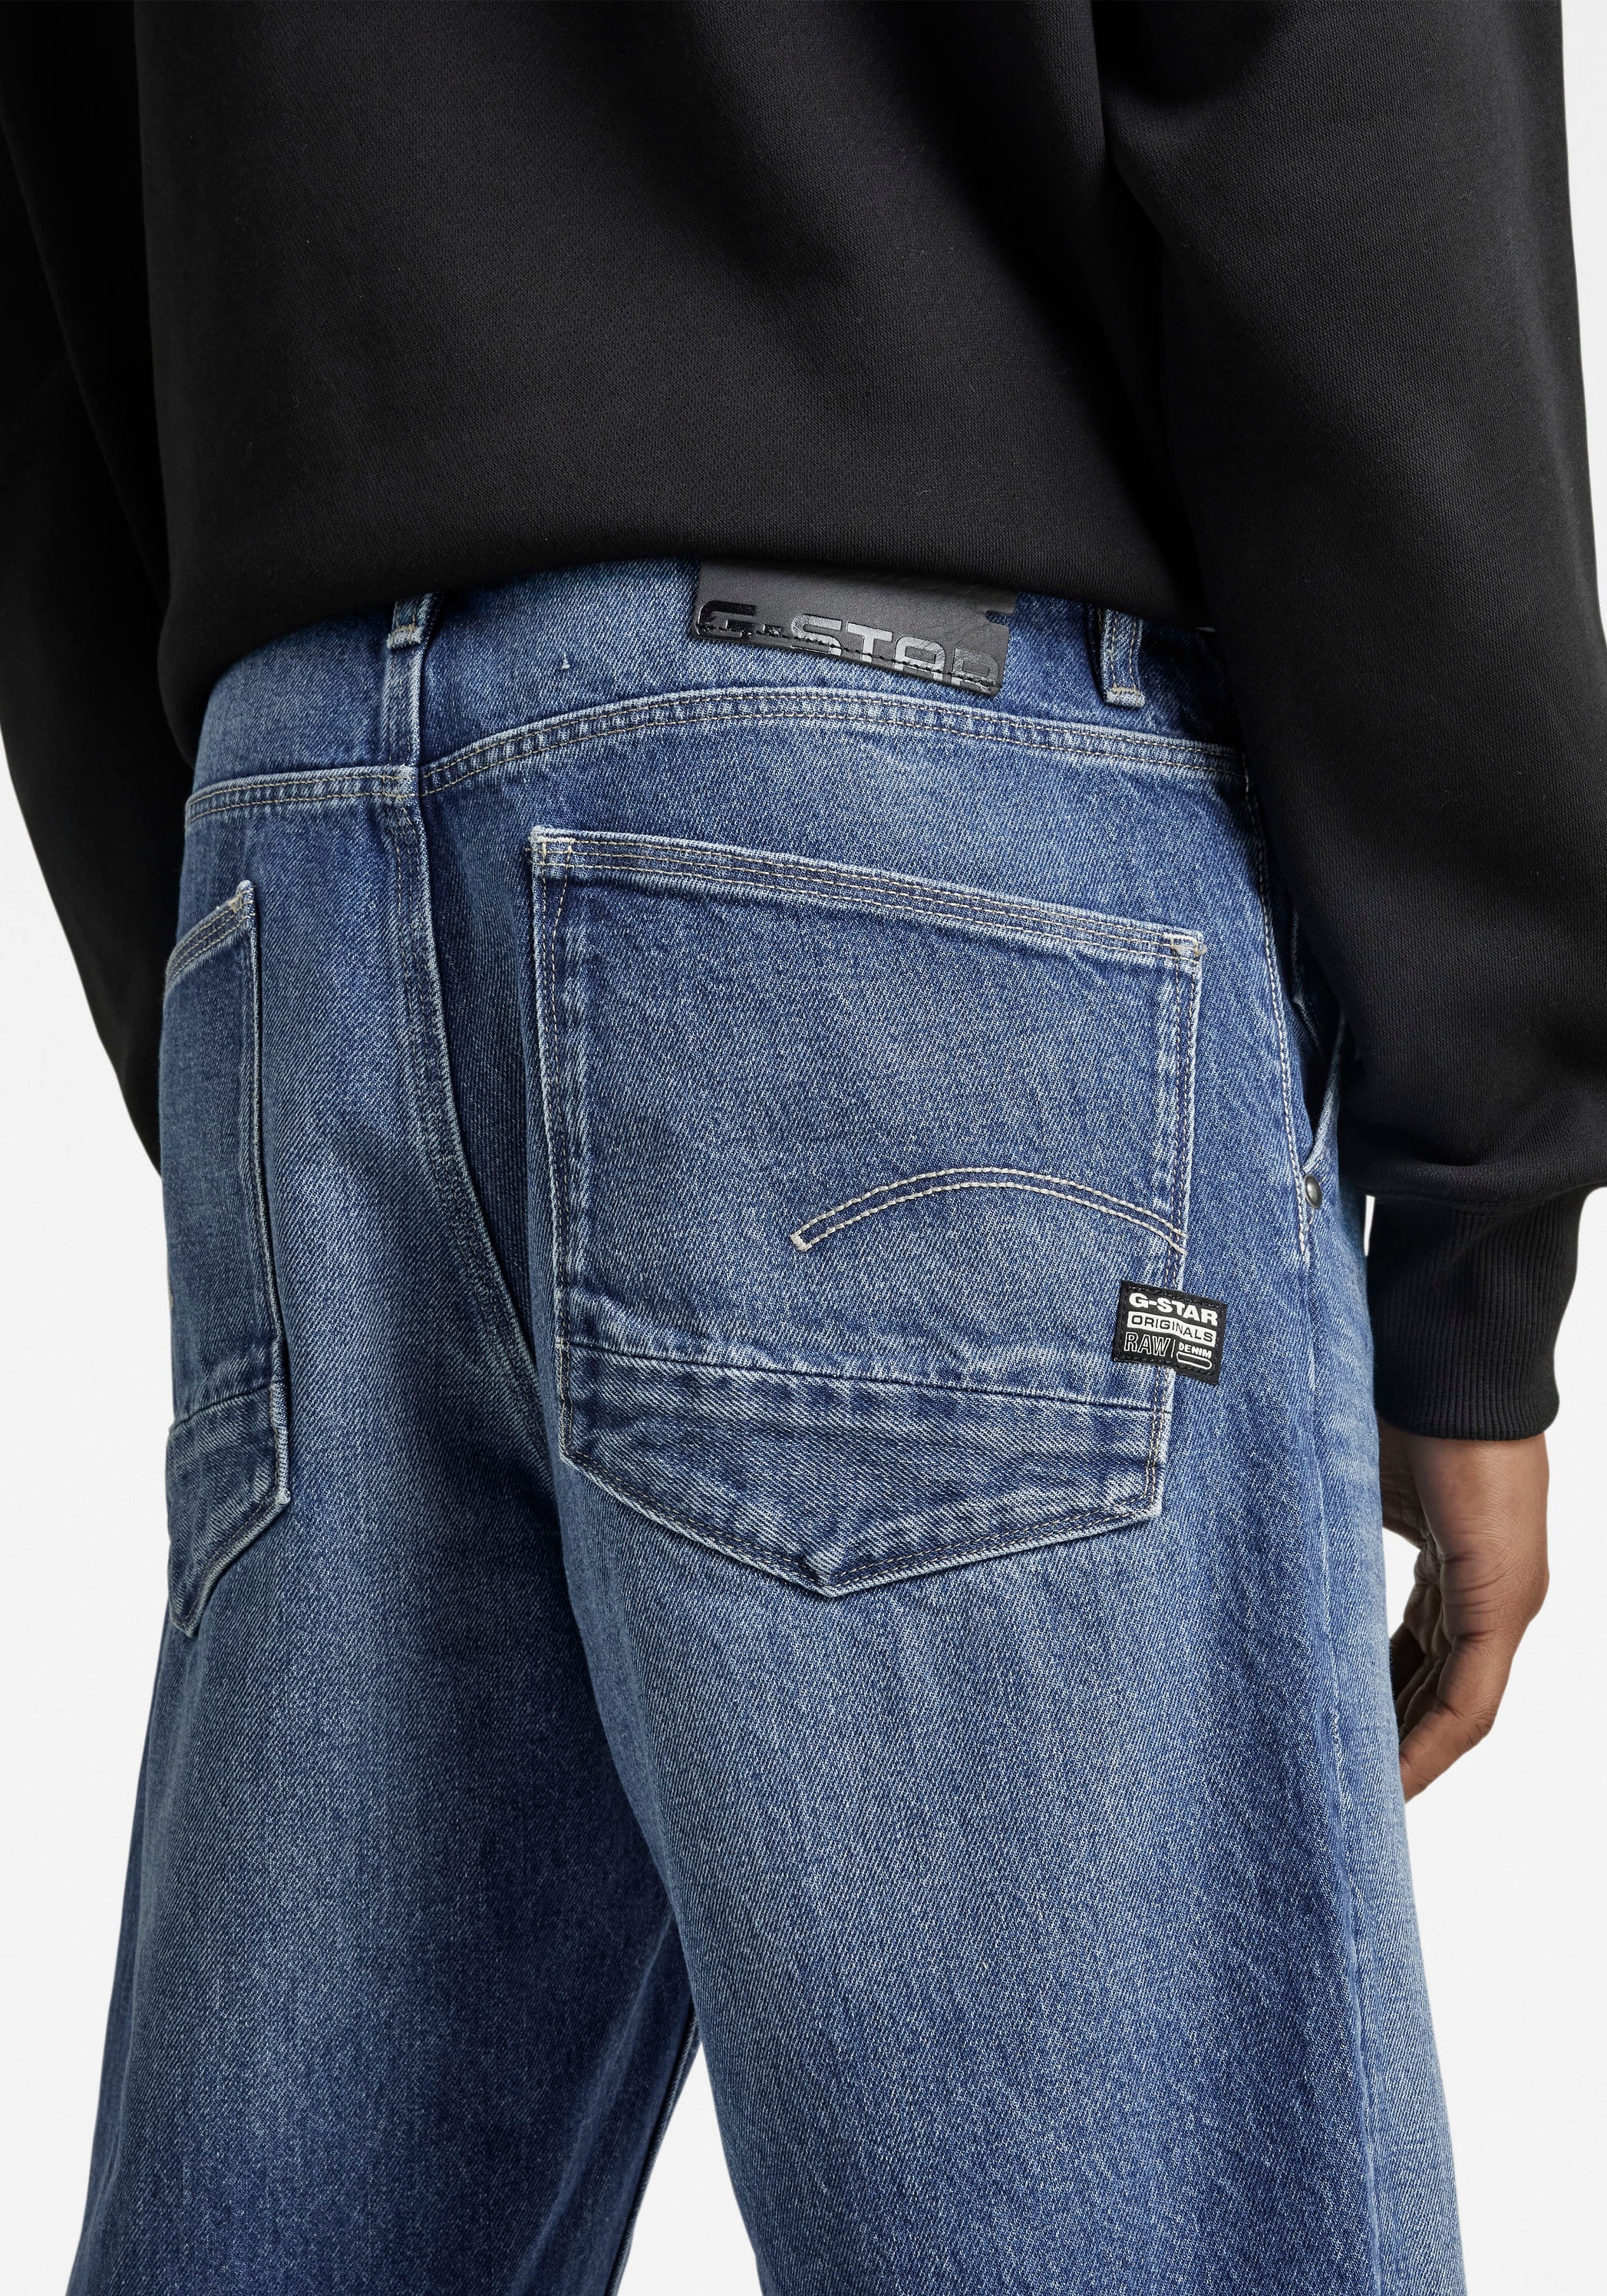 G-Star RAW Tapered-fit-Jeans »Relaxed Tapered | ▷ bestellen BAUR Grip 3d«